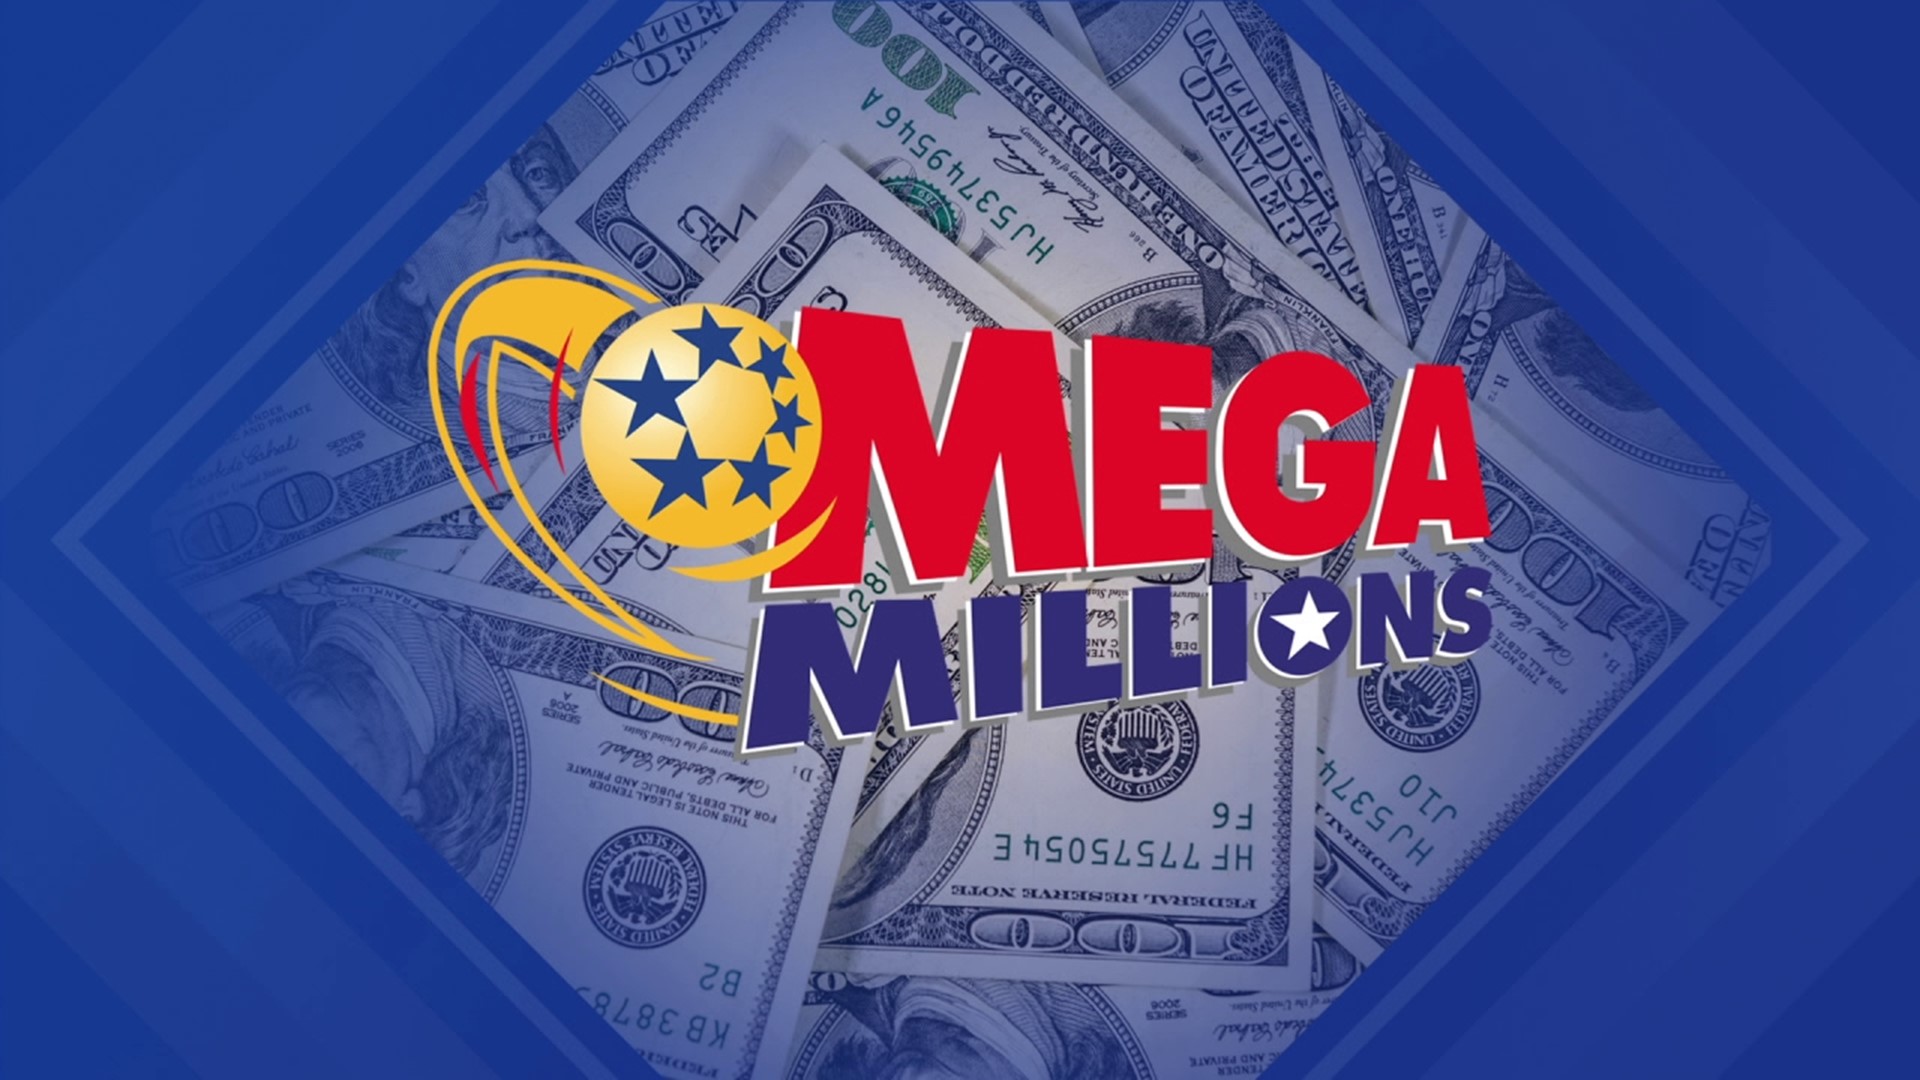 The third largest jackpot in Mega Millions history will be drawn Tuesday night, and one lucky winner could take home the jackpot.